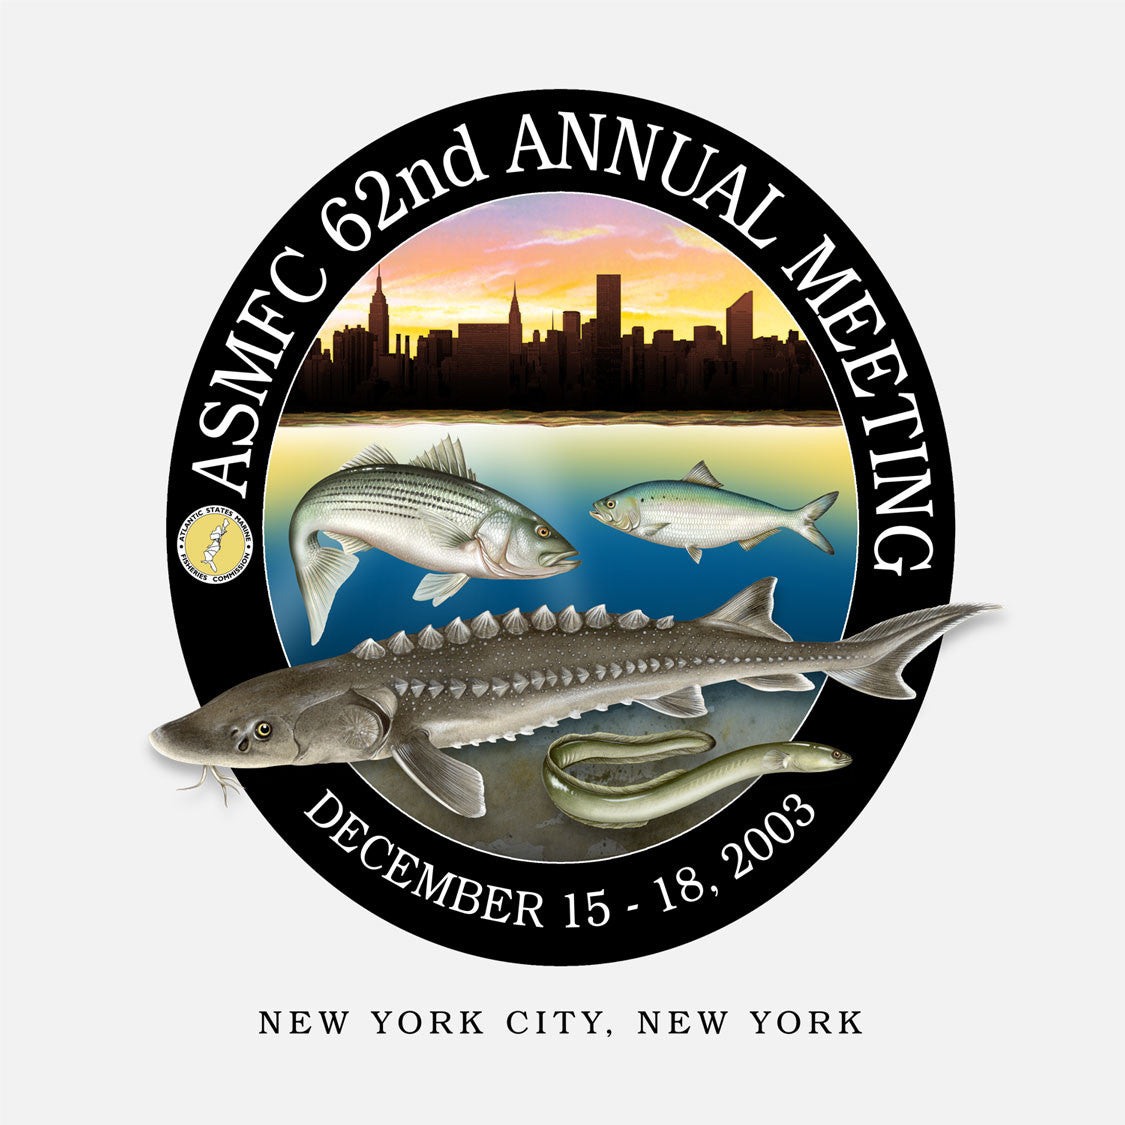 62nd annual meeting of the Atlantic States Marine Fisheries Commission, New York City, New York, 2003. The logo is of several fish species in front of a New York skyline.